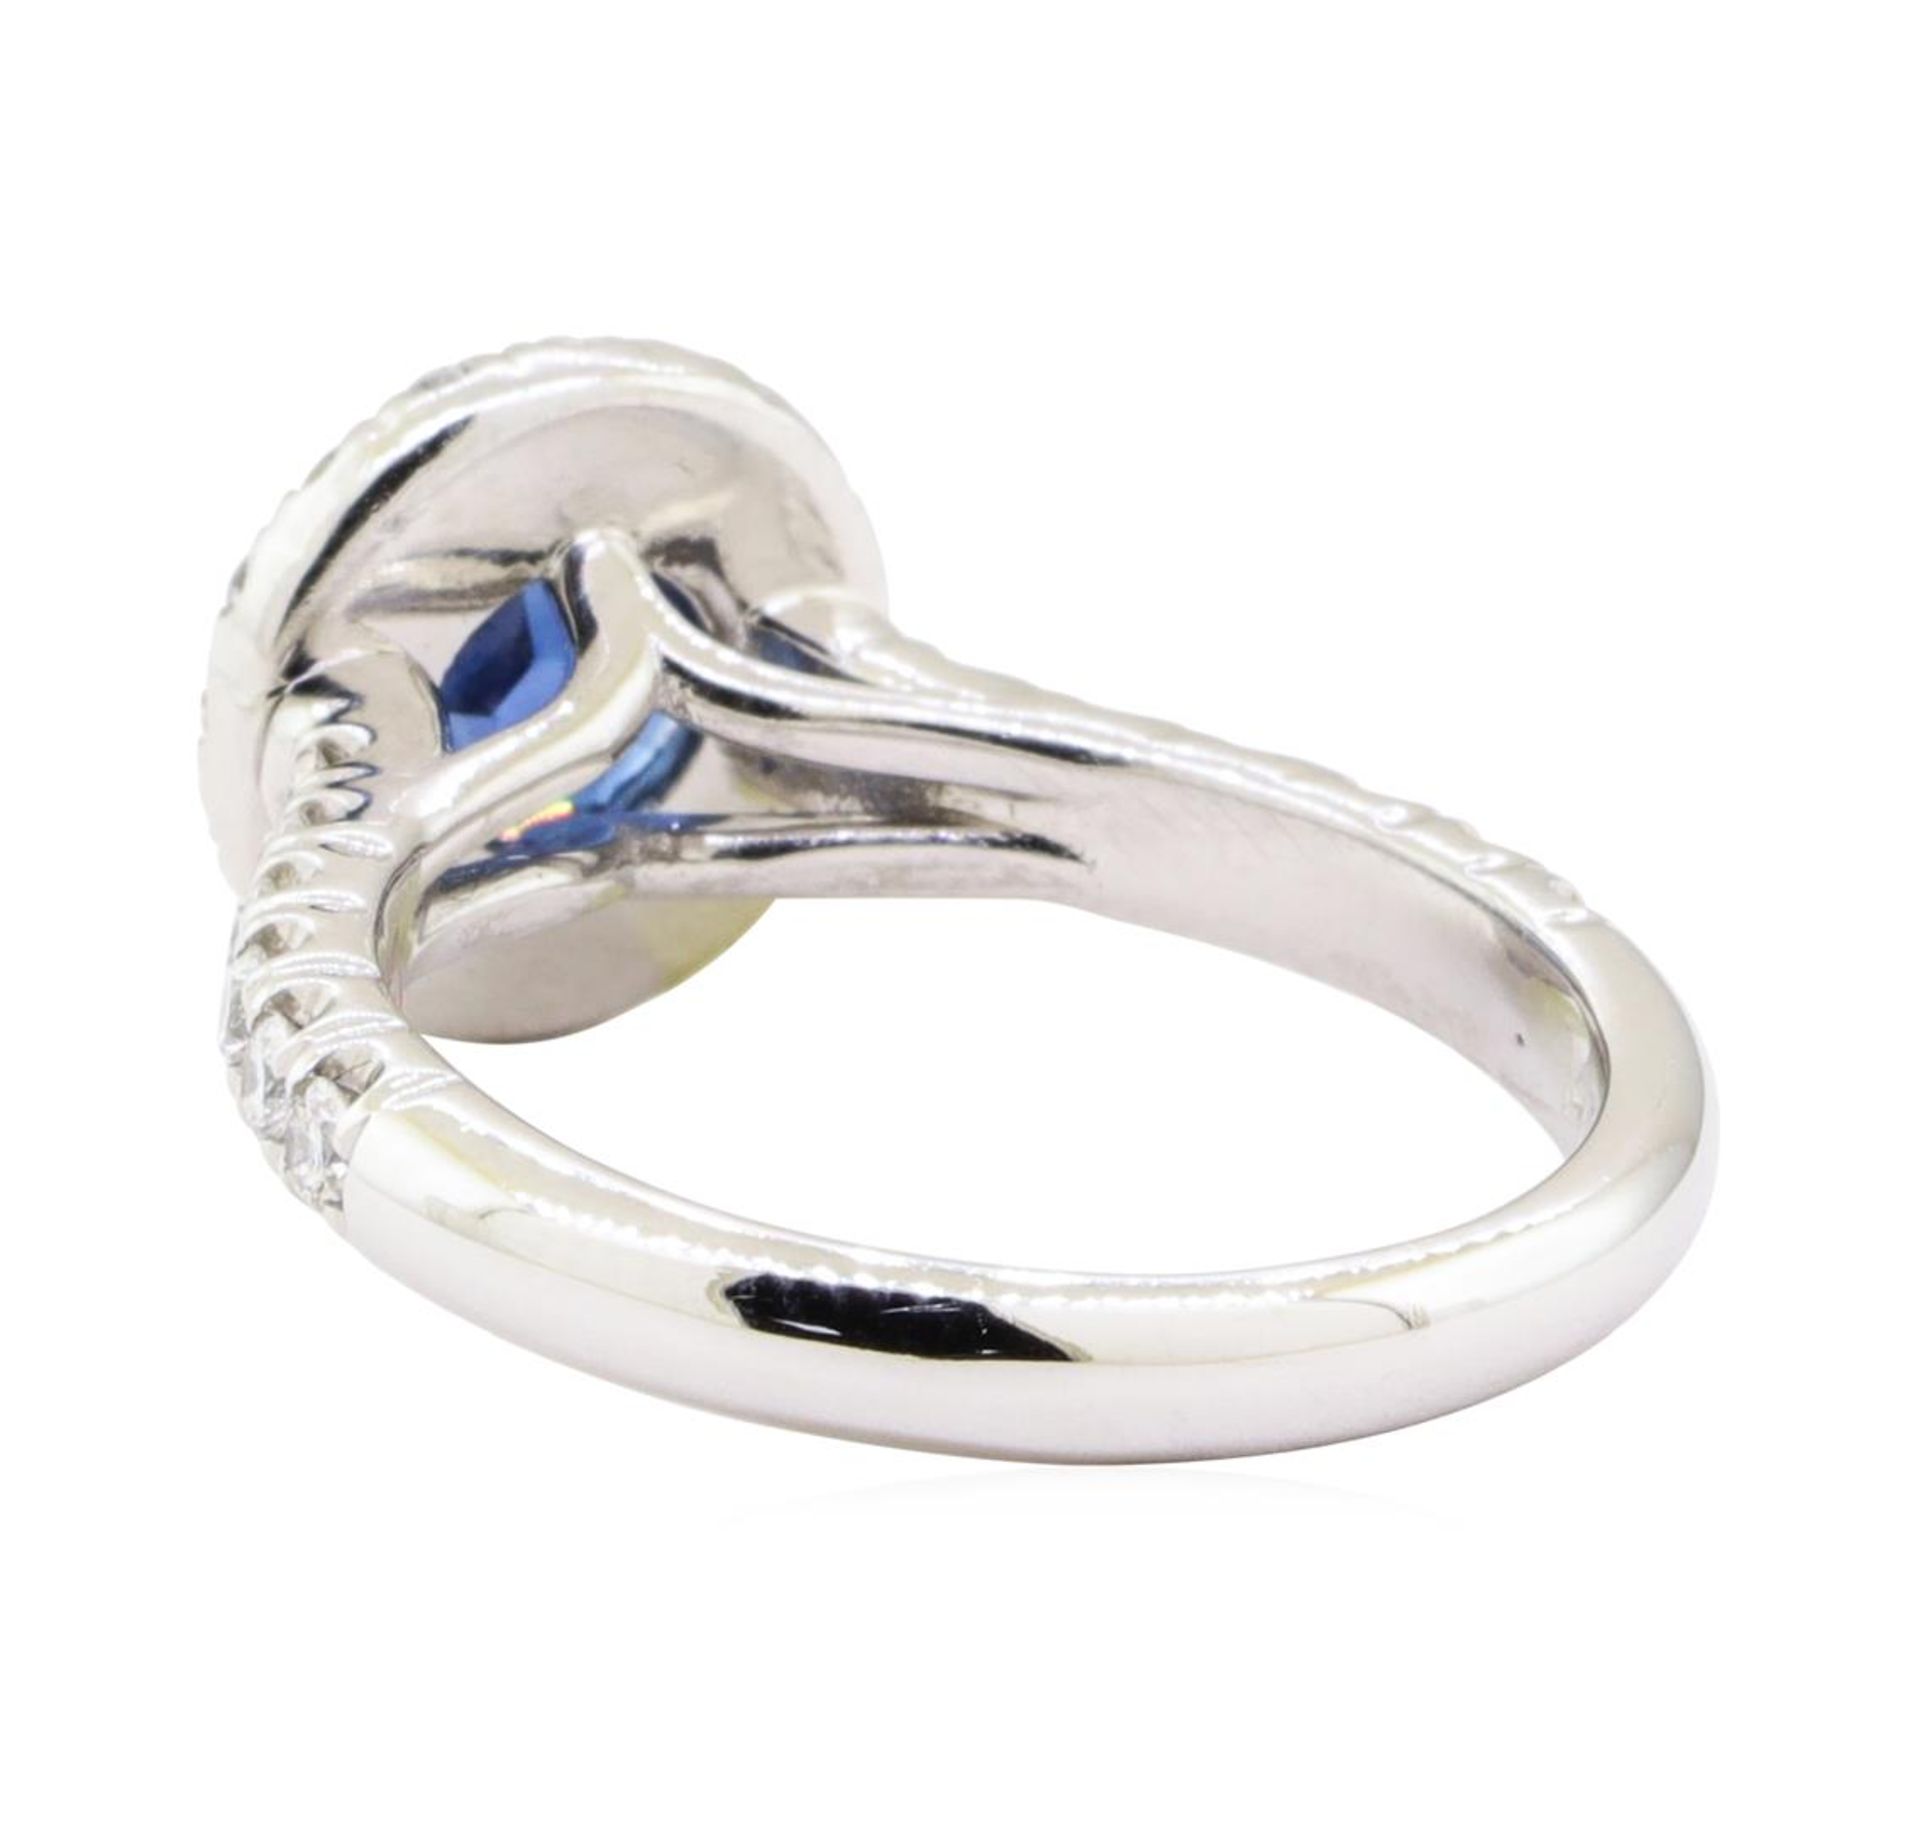 1.42 ctw Sapphire And Diamond Ring - 14KT White Gold - Image 3 of 5